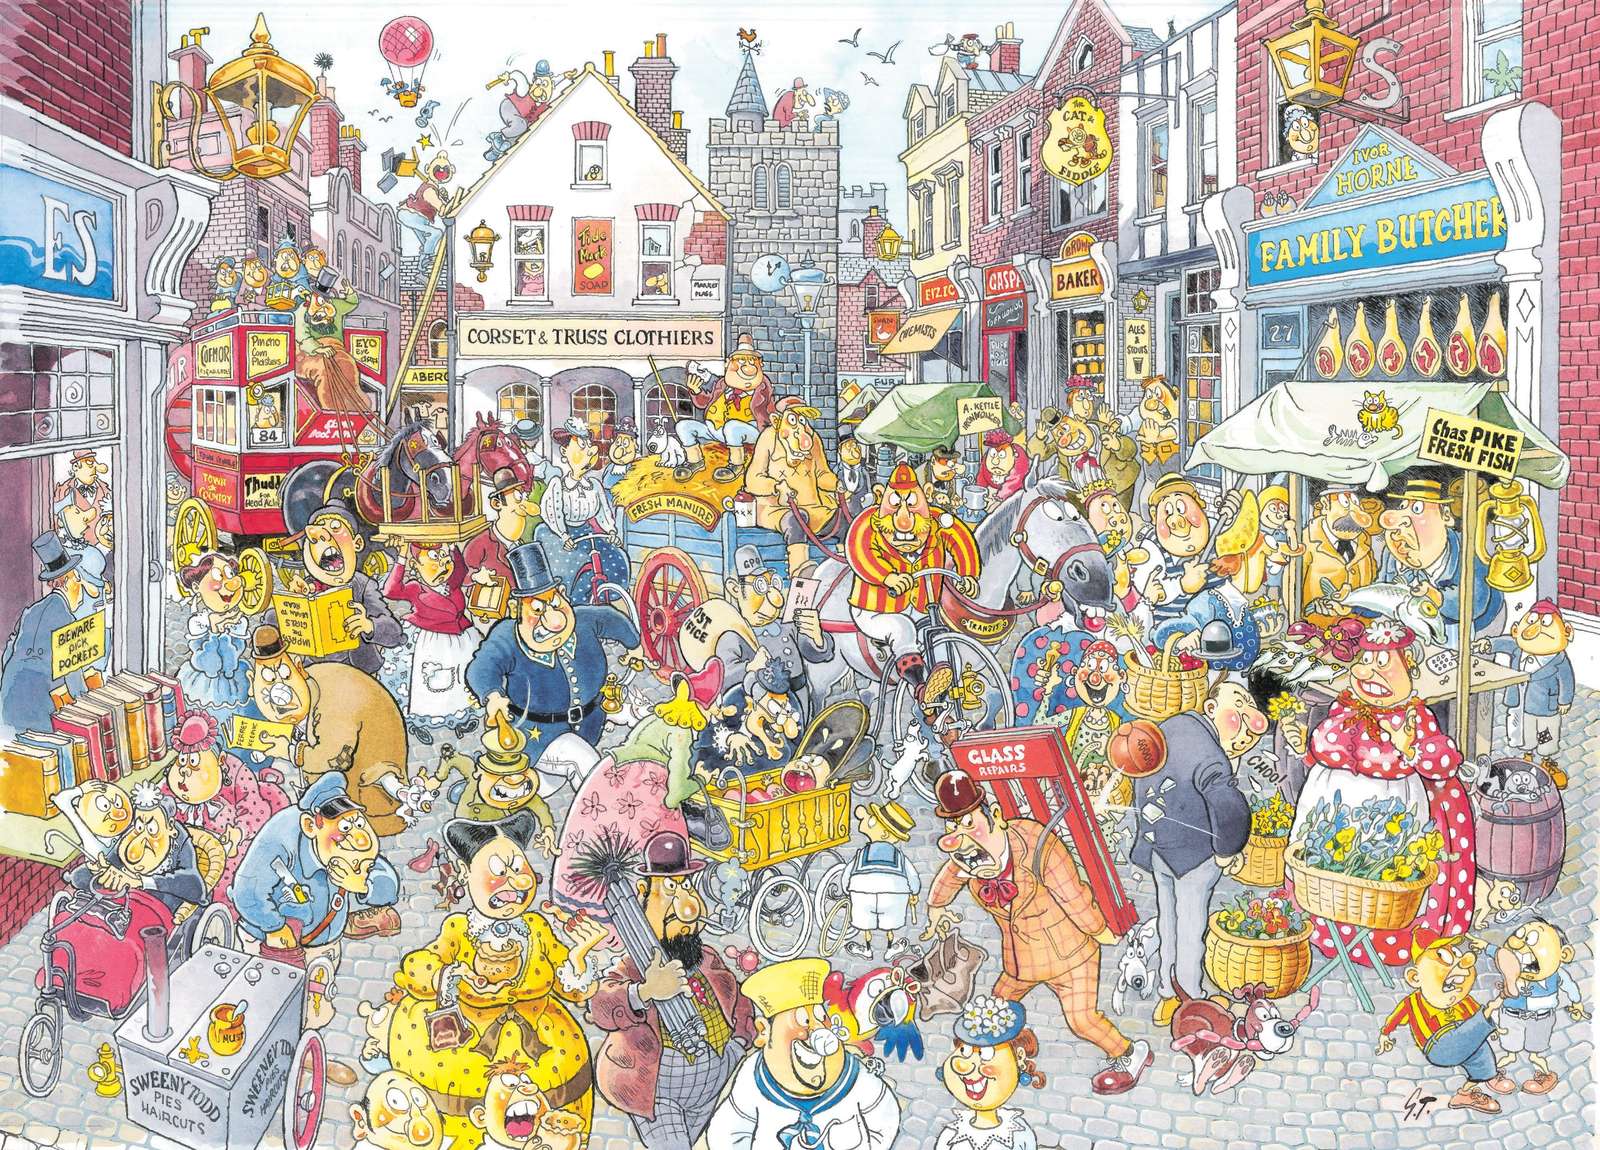 Saturday on the High Street puzzle online from photo